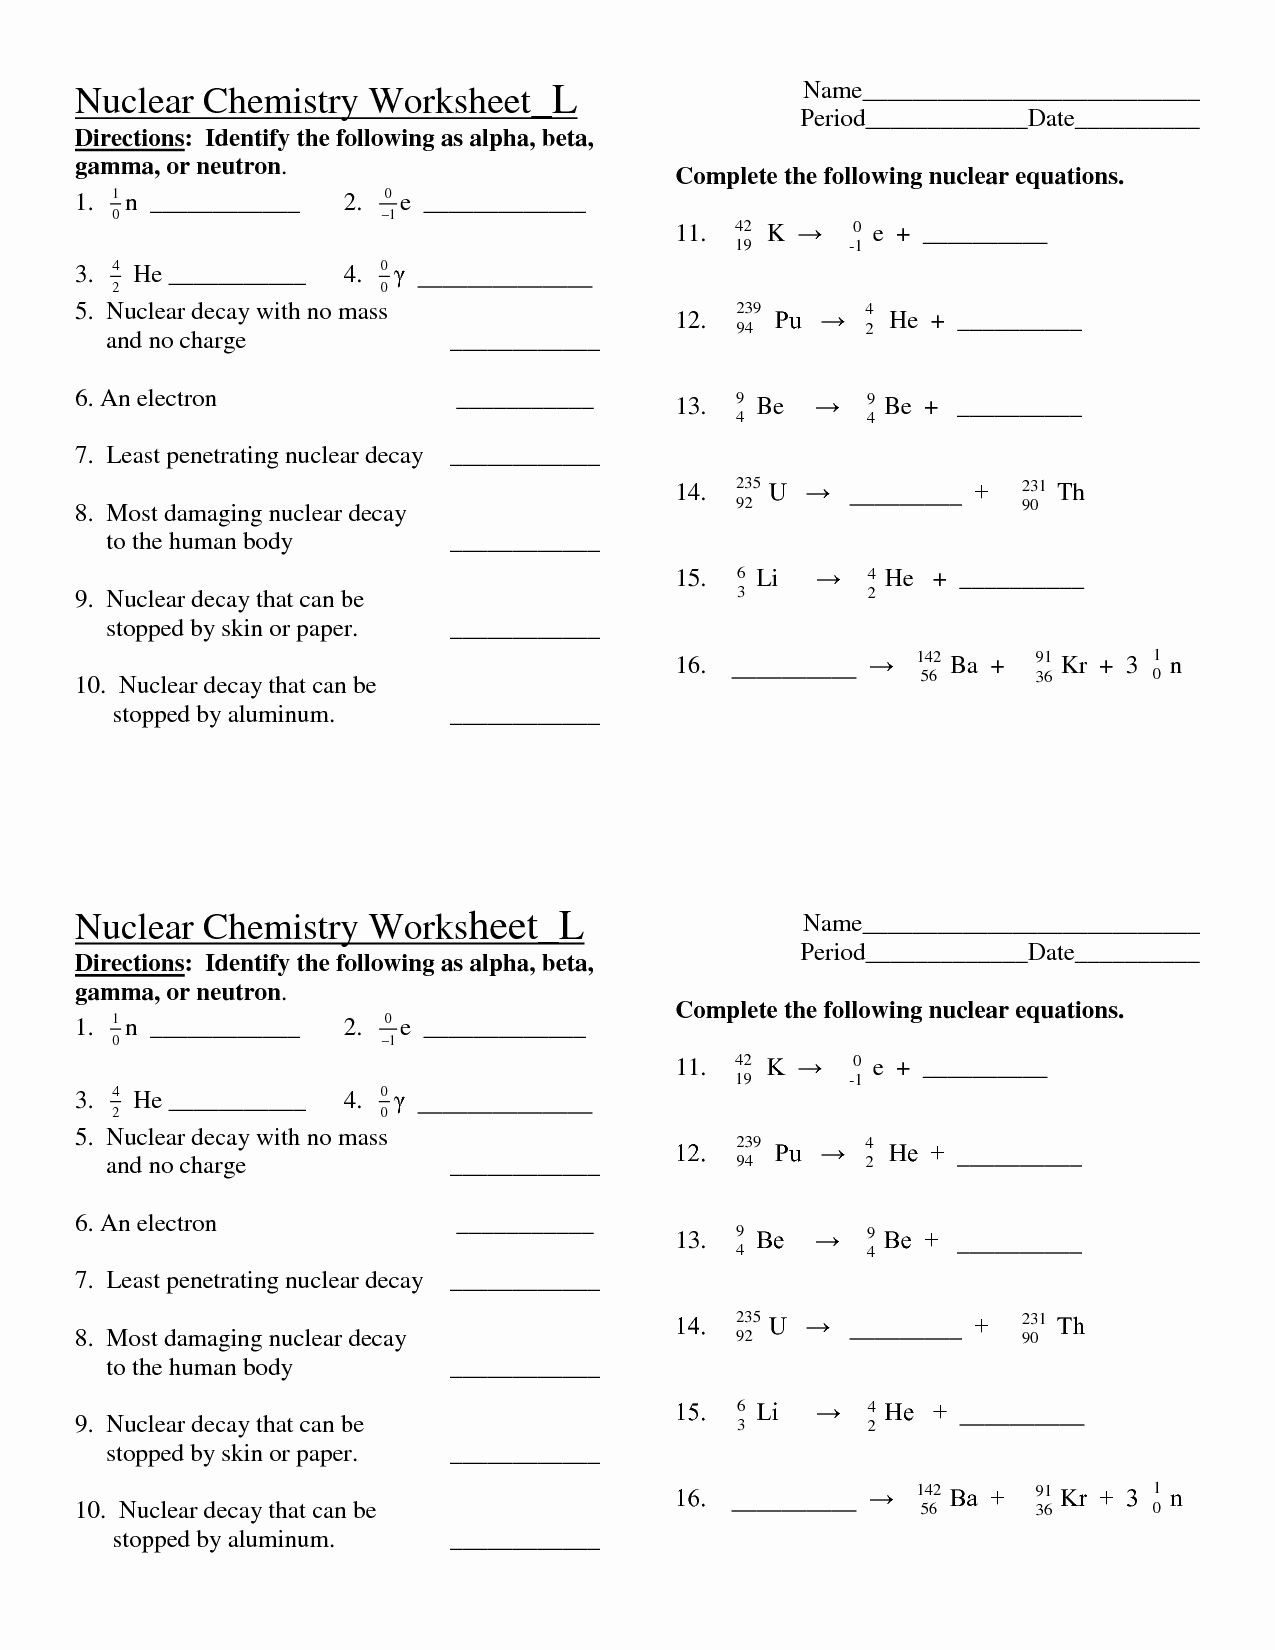 Nuclear Decay Worksheet Answer Key 50 Nuclear Chemistry Worksheet Answer Key In 2020